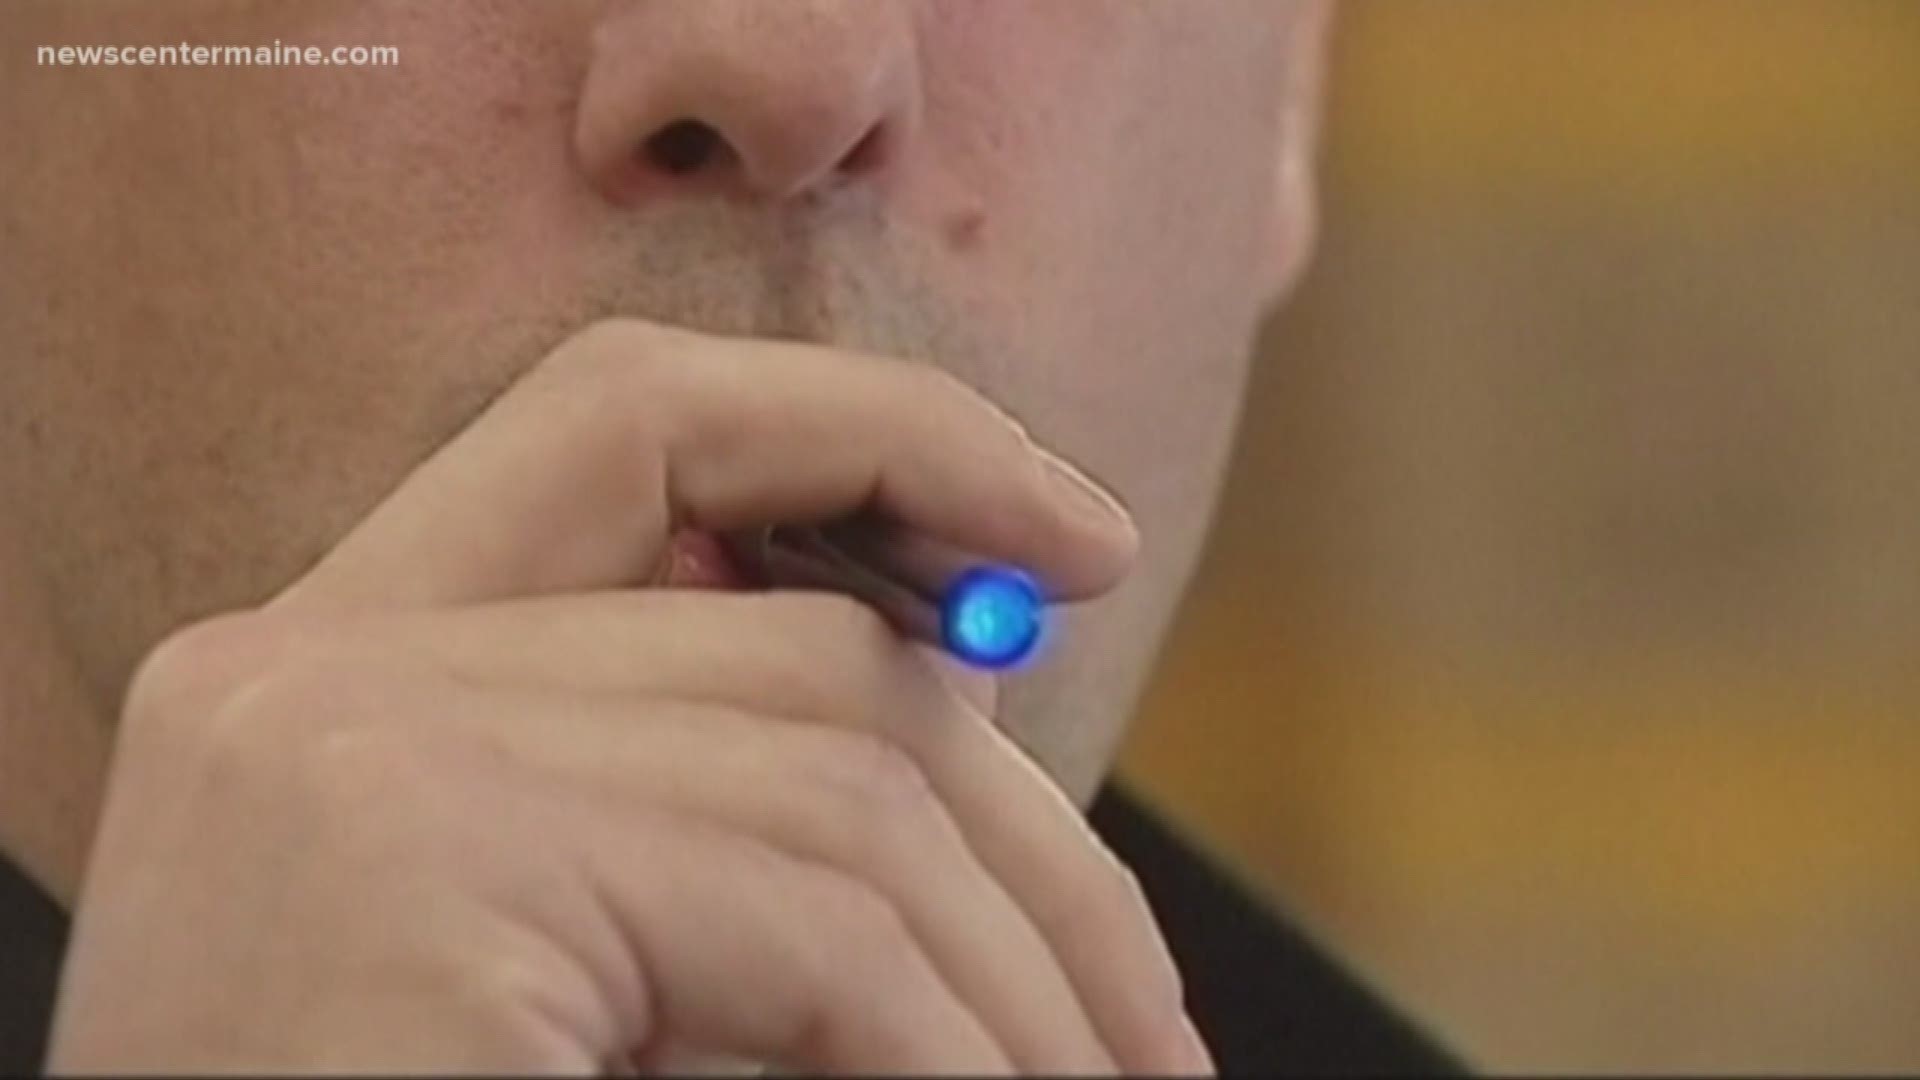 The law to ban e-cigarettes from schools in Maine goes into effect September 19.